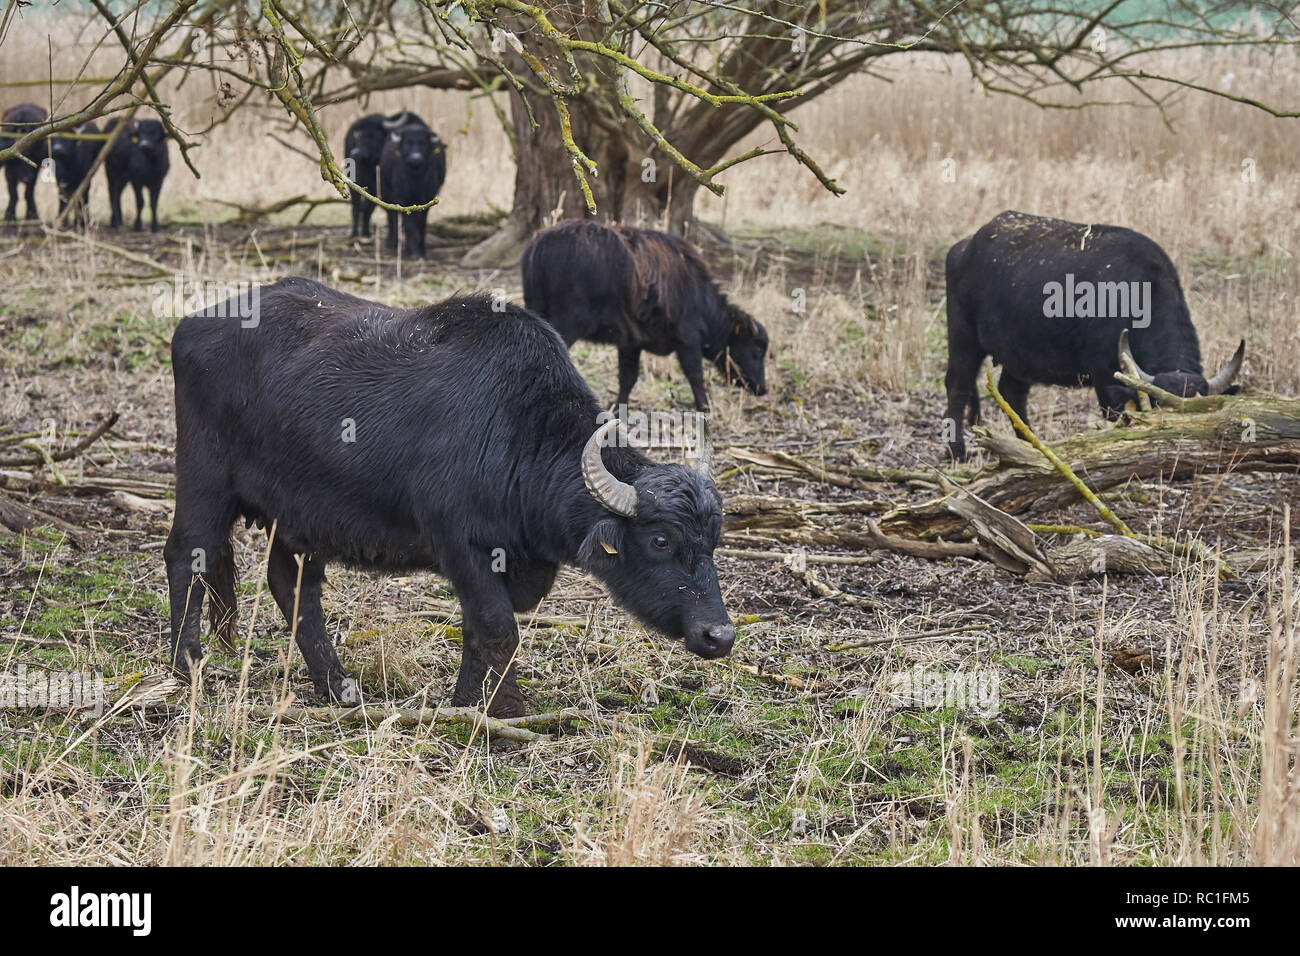 10 January 2019, Rhineland-Palatinate, Thür: Carpathian buffalos graze in the Thürer Wiesen nature reserve. Nature conservationists are pleased with the success of grazing projects, robust animal breeds keep areas free of vegetation and thus promote biodiversity. (Zu dpa: Primitive cattle and horses work as landscape gardeners from 13.03.2019). Photo: Thomas Frey/dpa Stock Photo